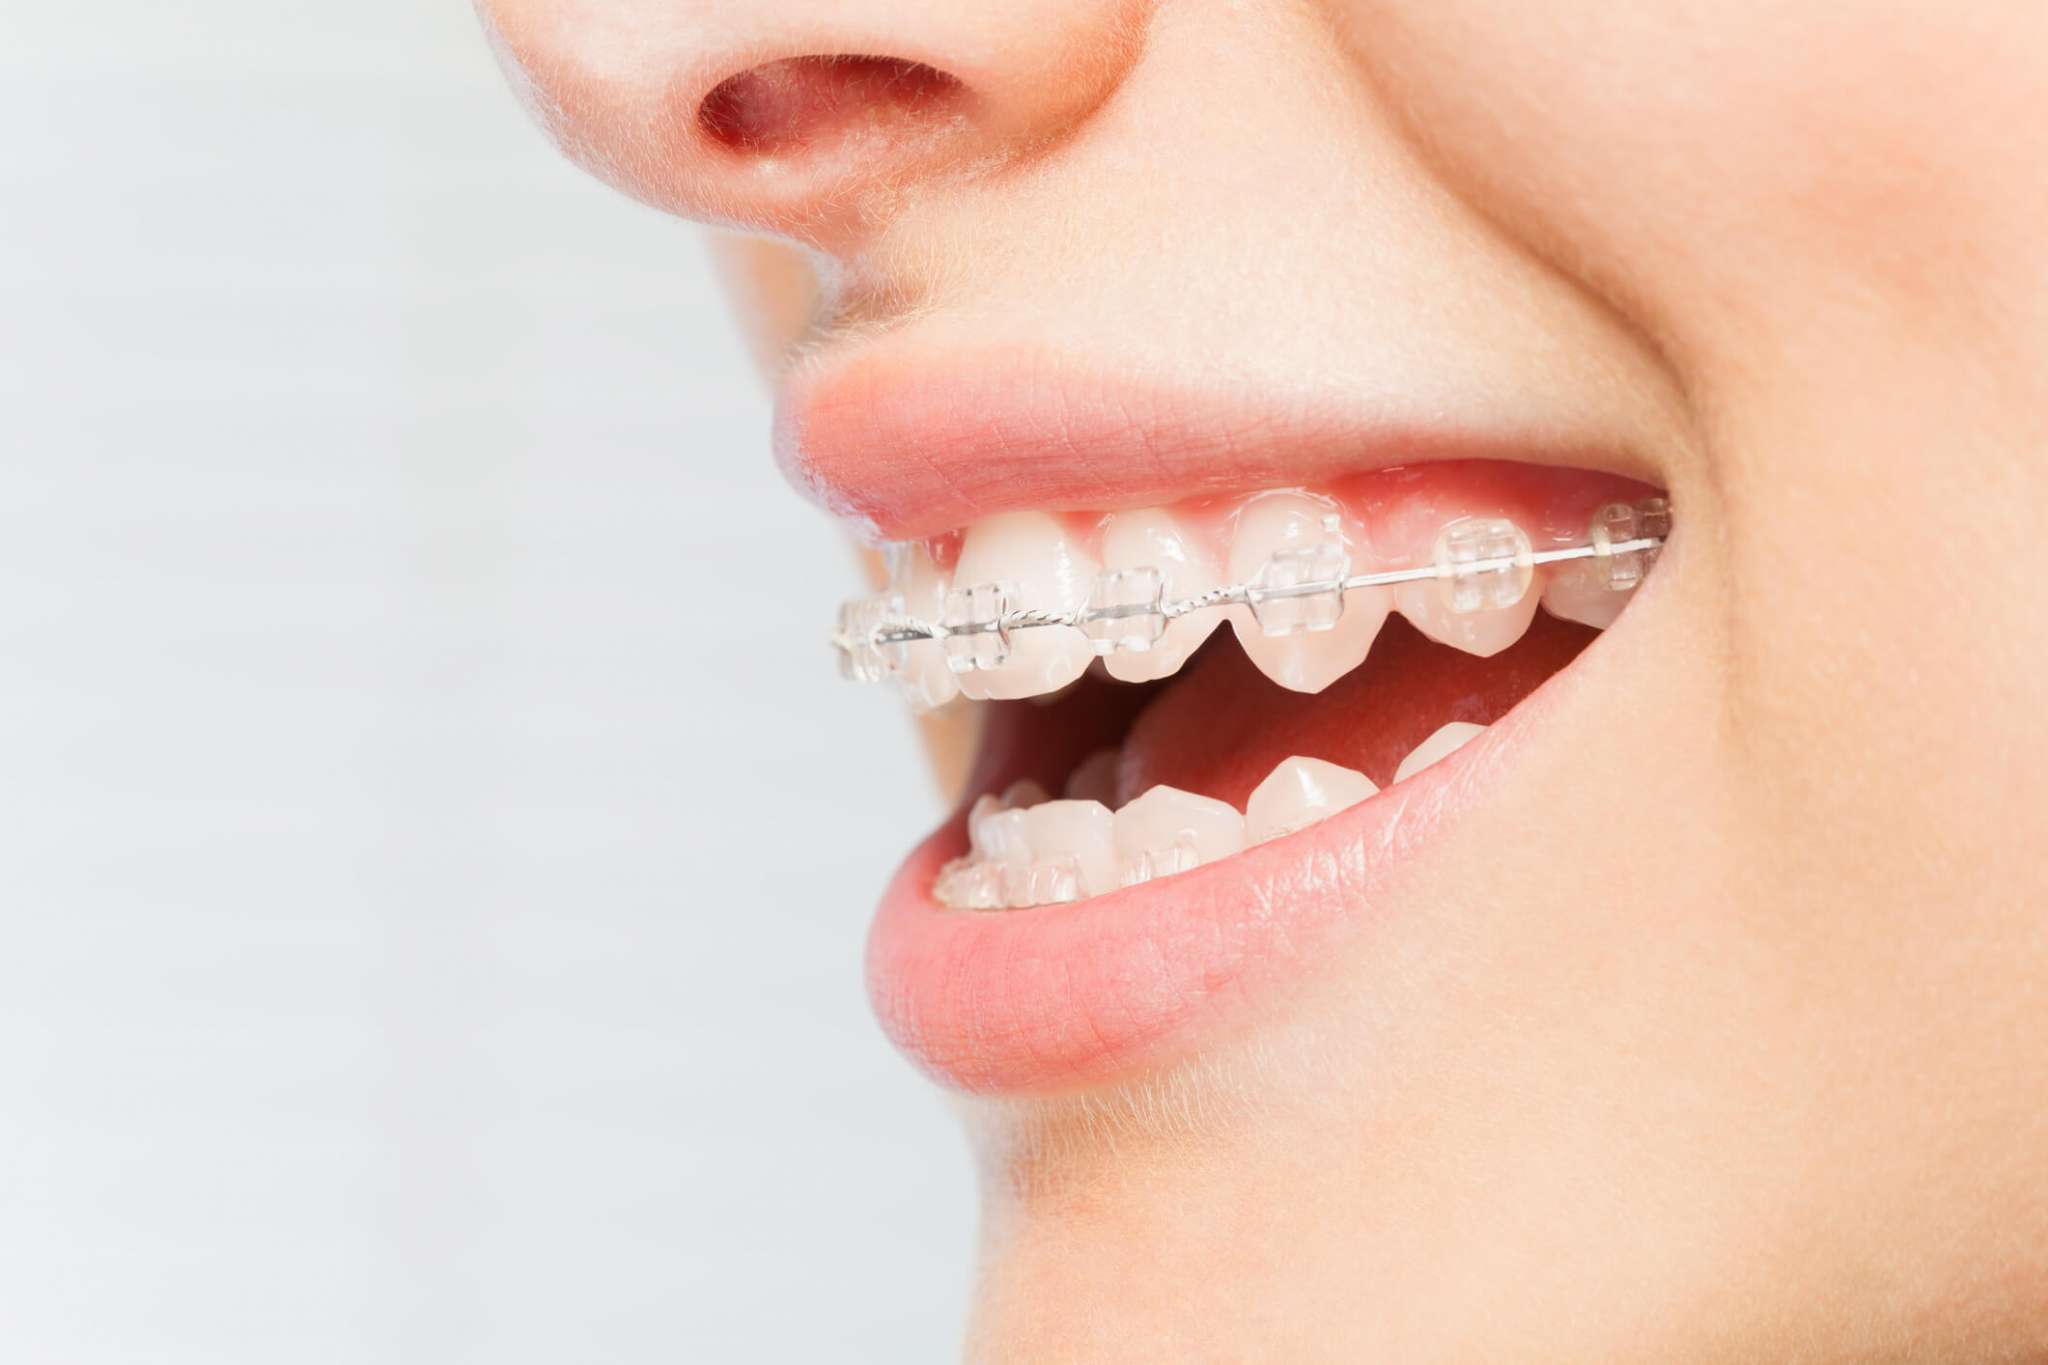 Can You Recommend Affordable Braces Providers Or Clinics?